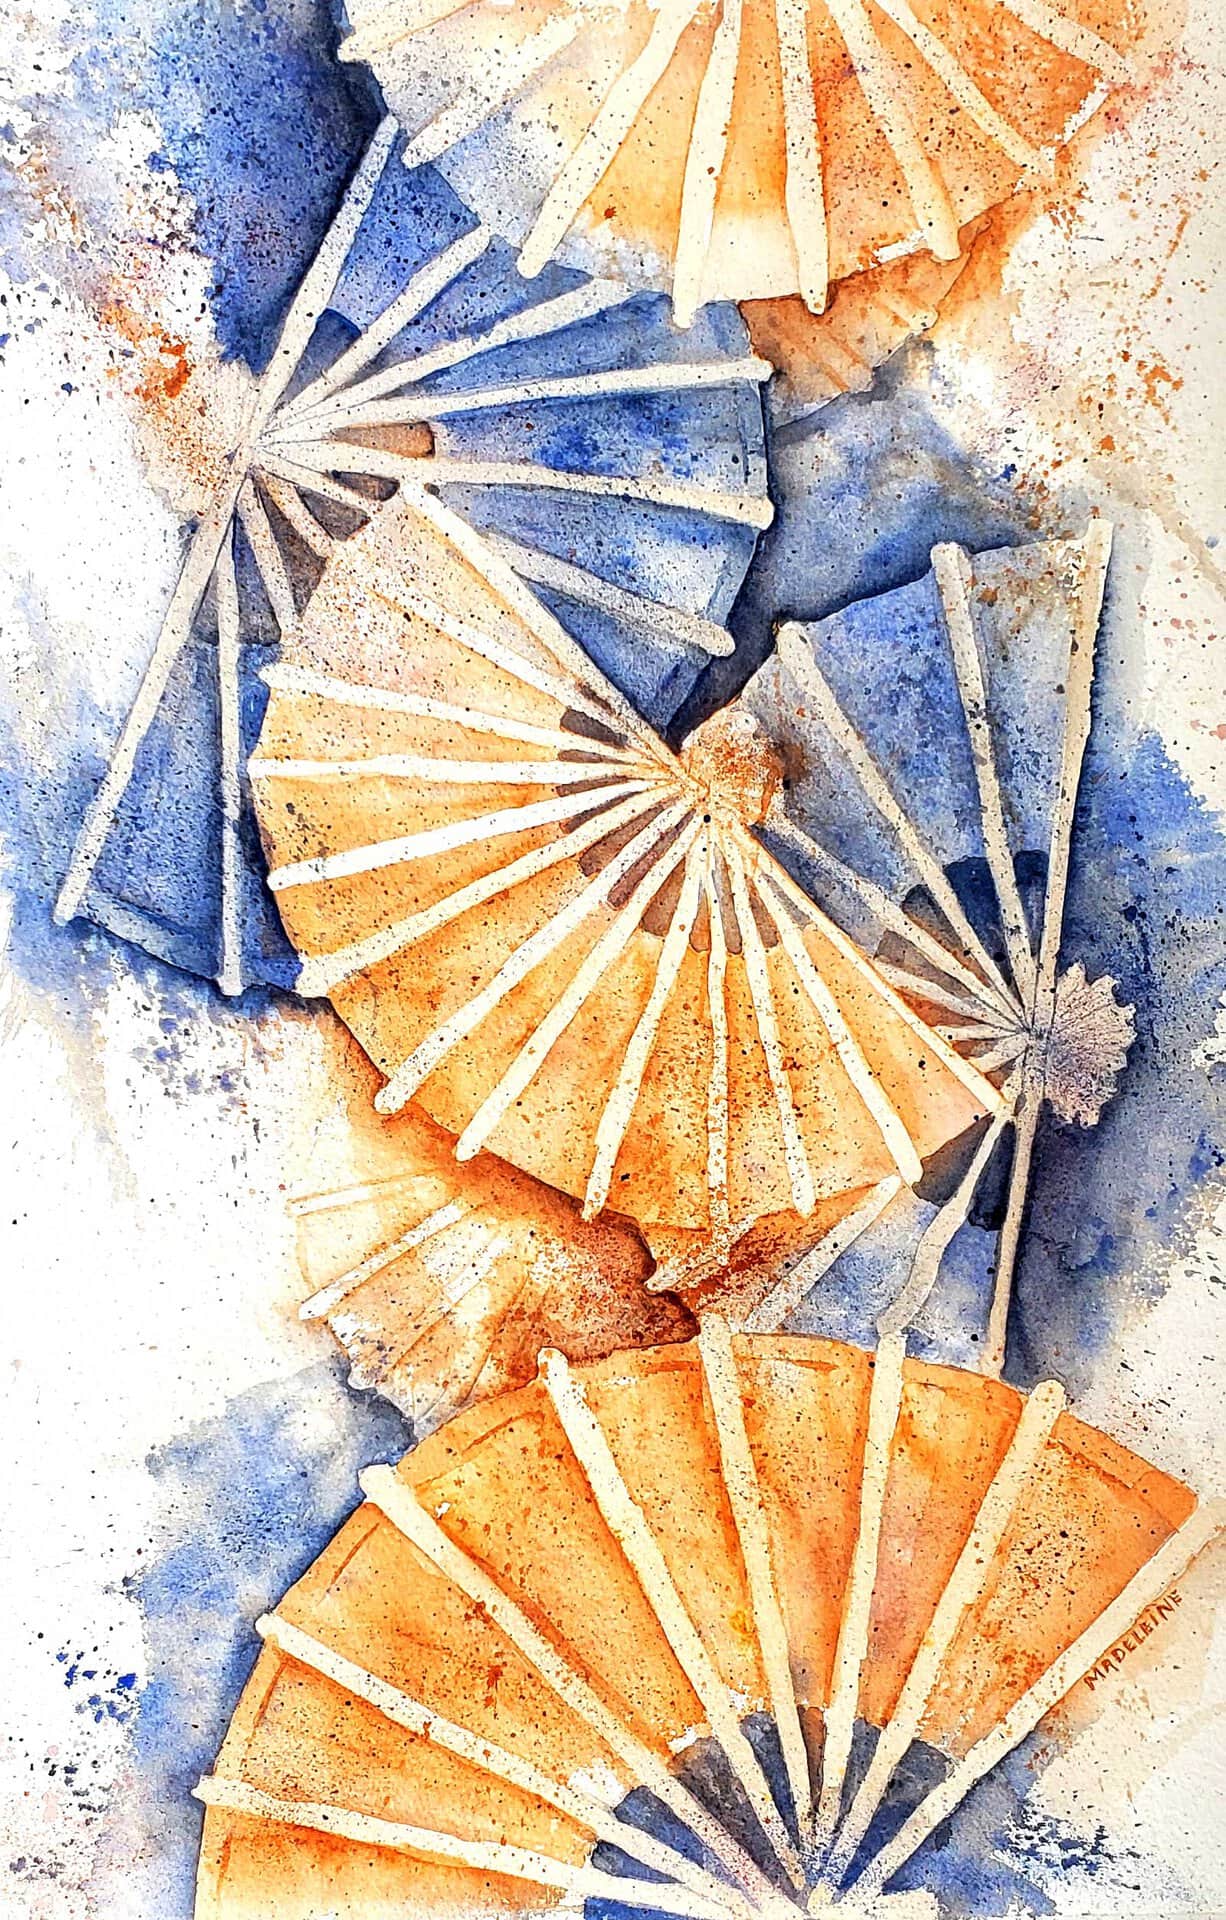 A watercolor painting of a fan with blue and orange colors by a Santa Barbara photographer.